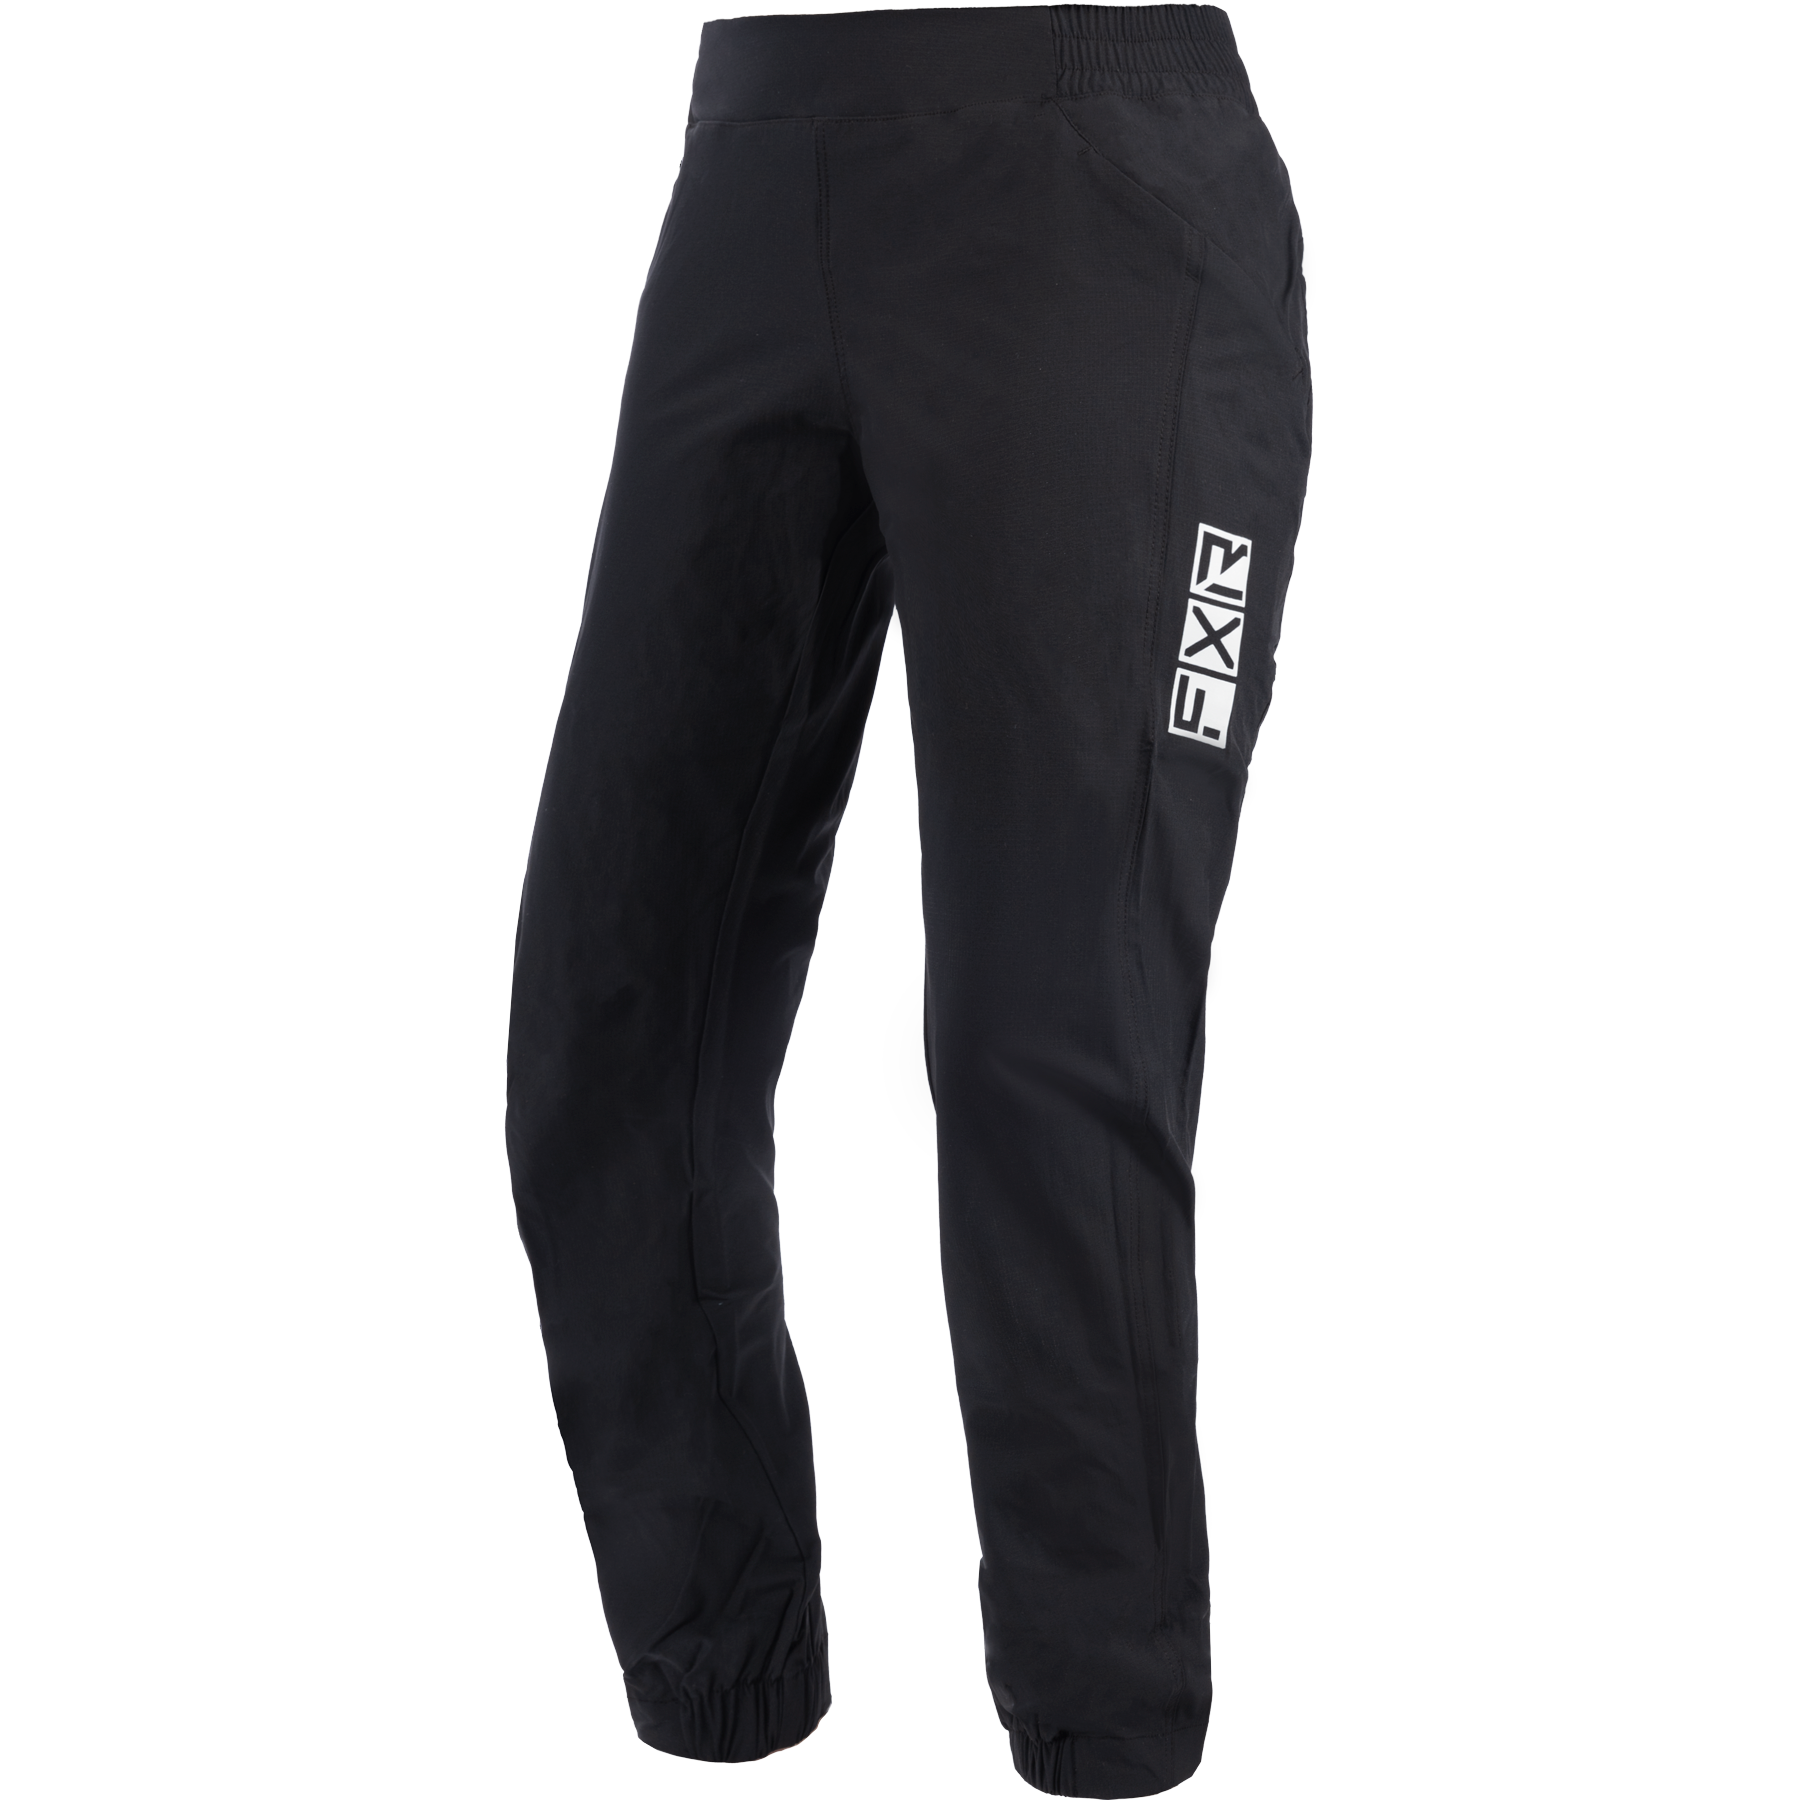 fxr racing pants for womens ride pack